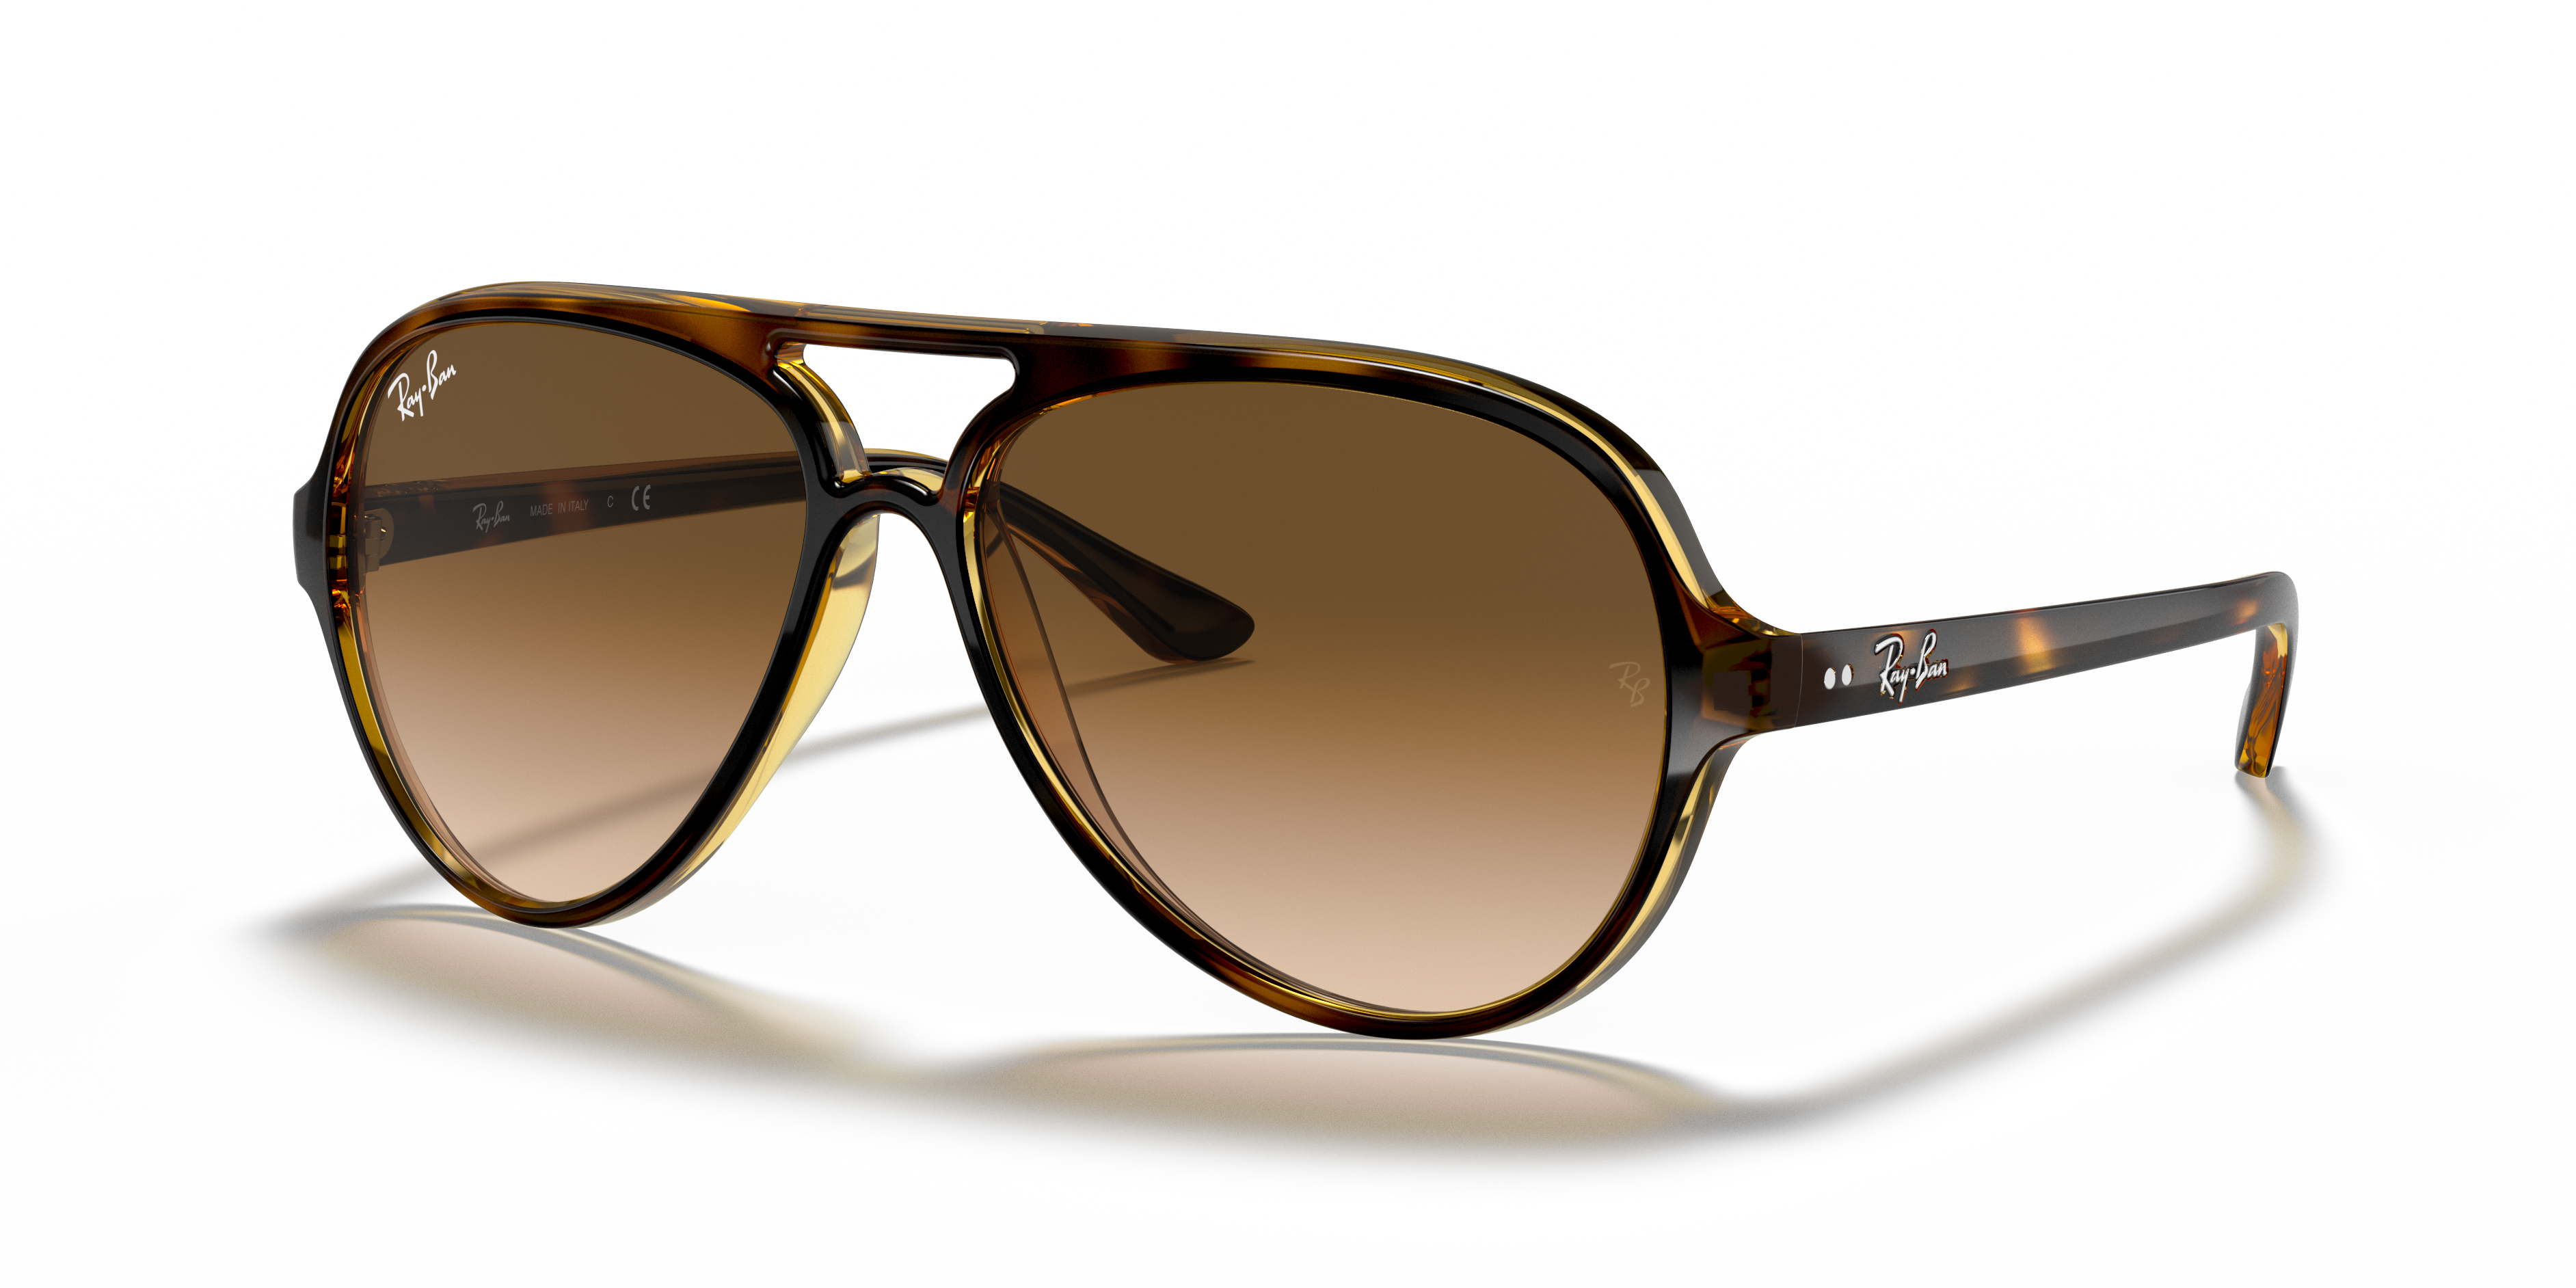 Cats 5000 Classic Sunglasses in Tortoise and Light Brown | Ray-Ban®